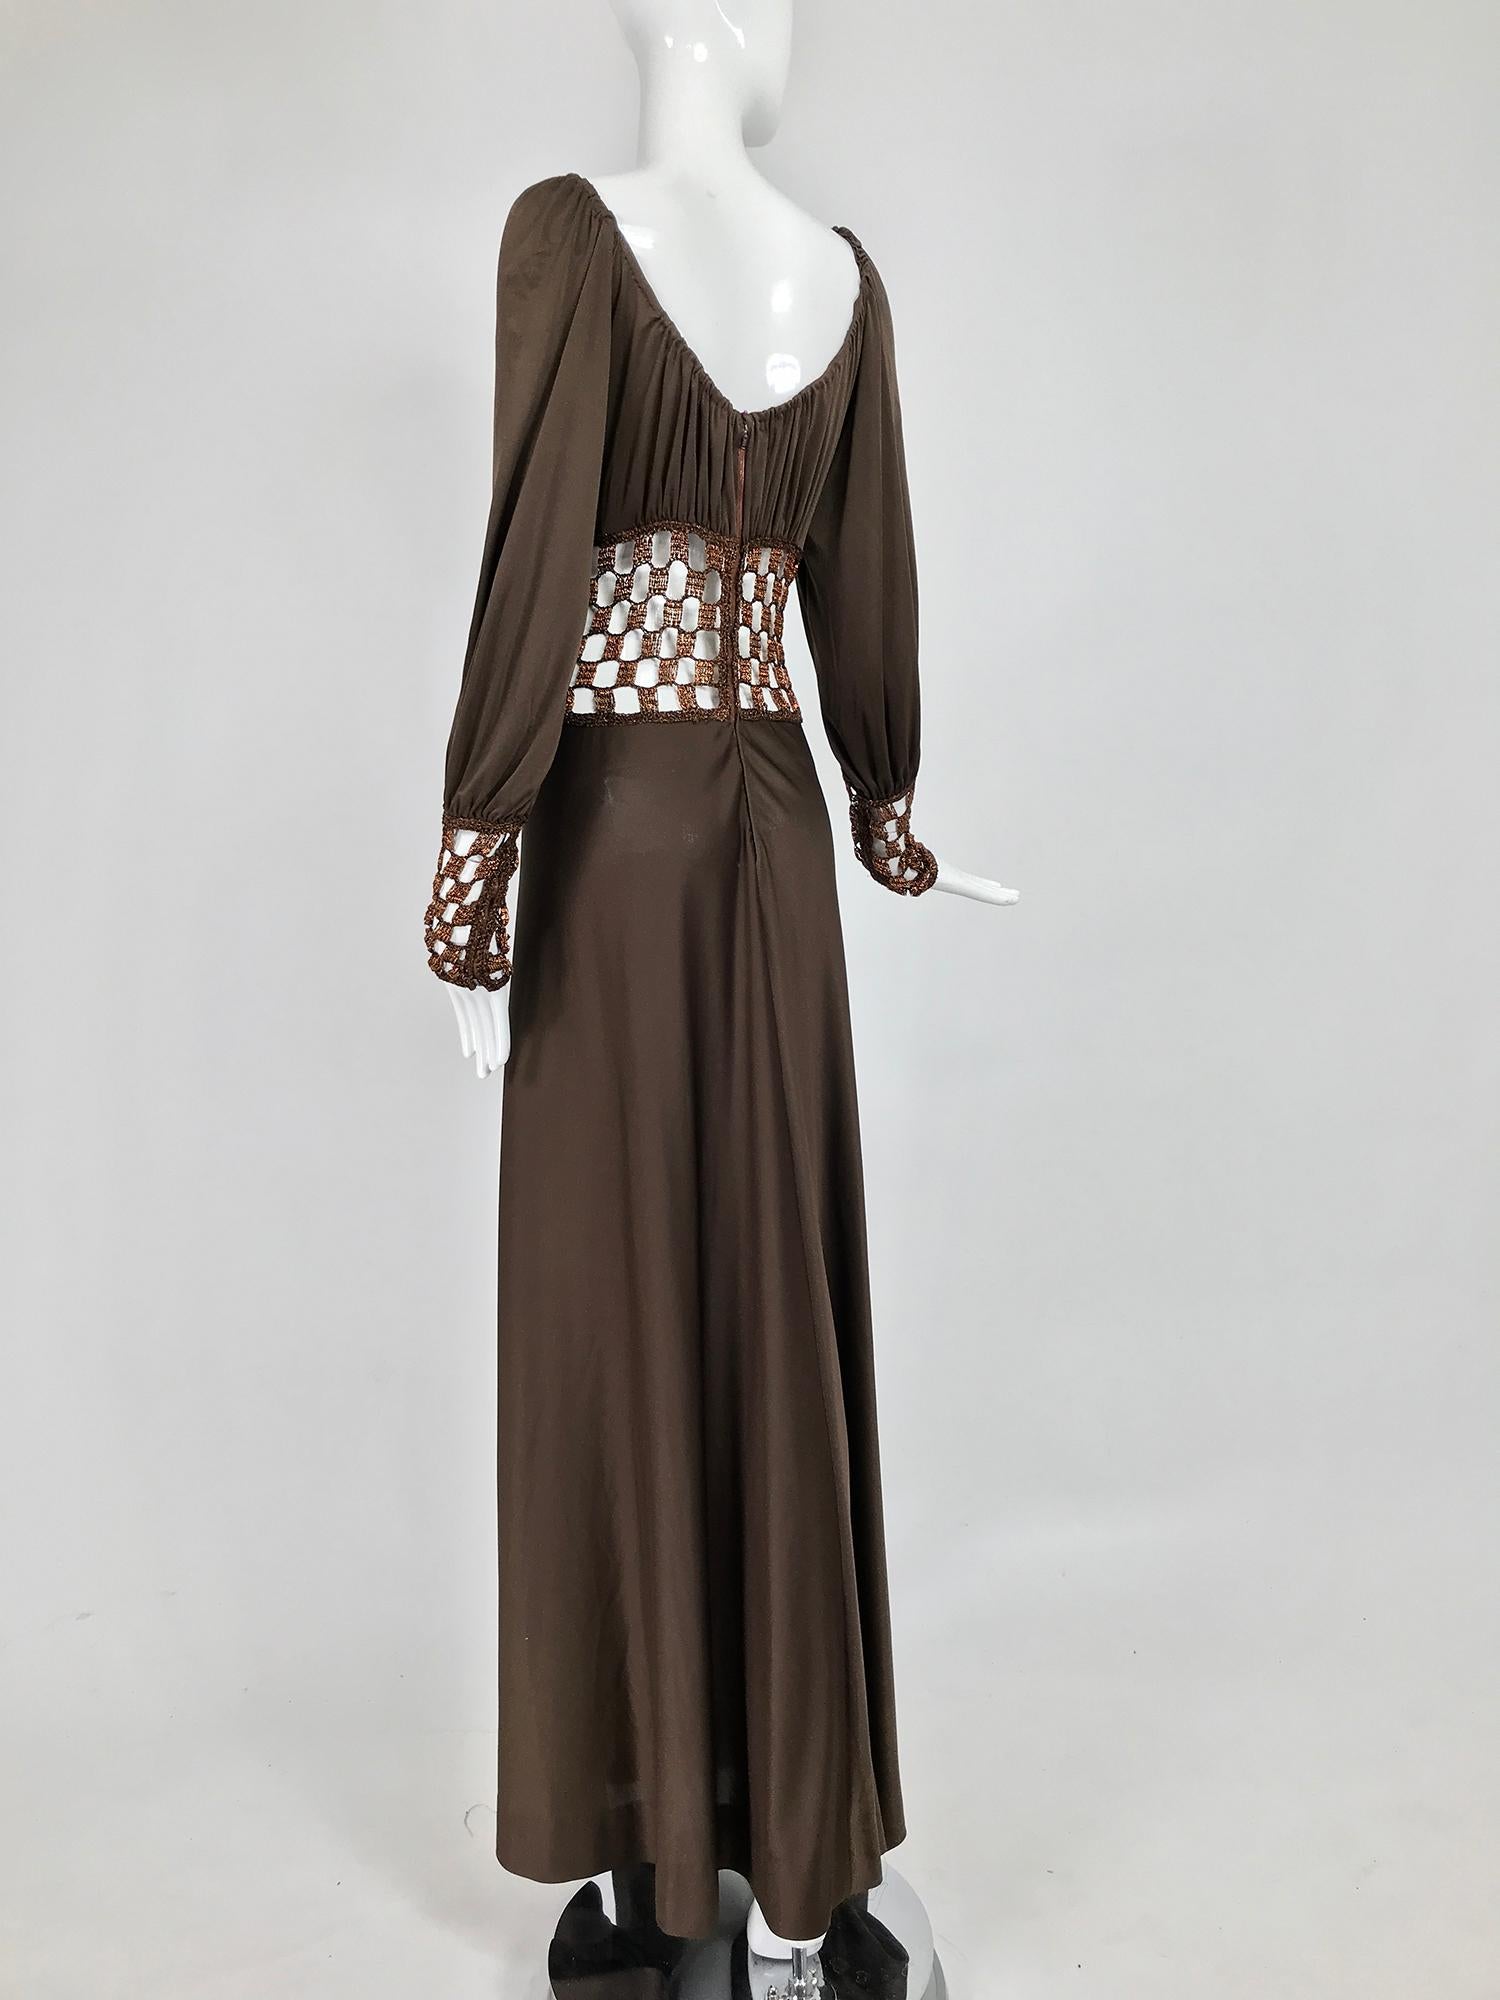 Black Loris Azzaro Couture Metal Chain and Silky Jersey Maxi Dress  1970s 